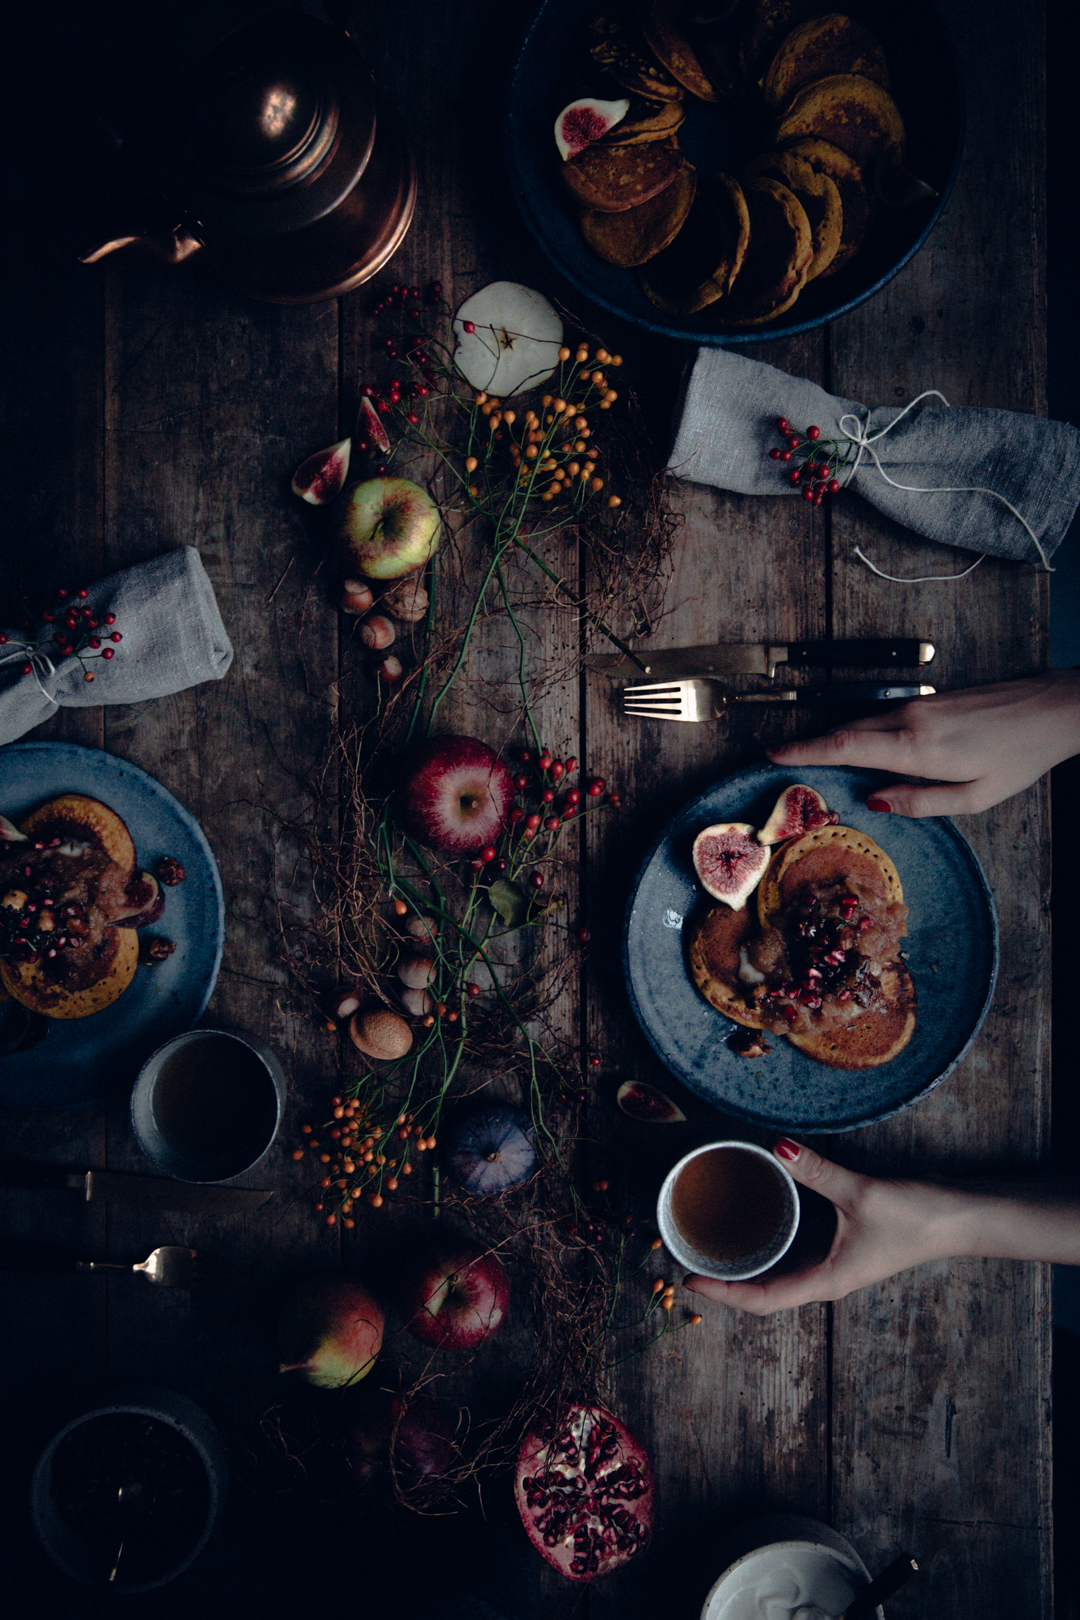 pumpkin-pancakes-with-food-stories-photography-by-christiann-koepke-of-christiannkoepke-com-28